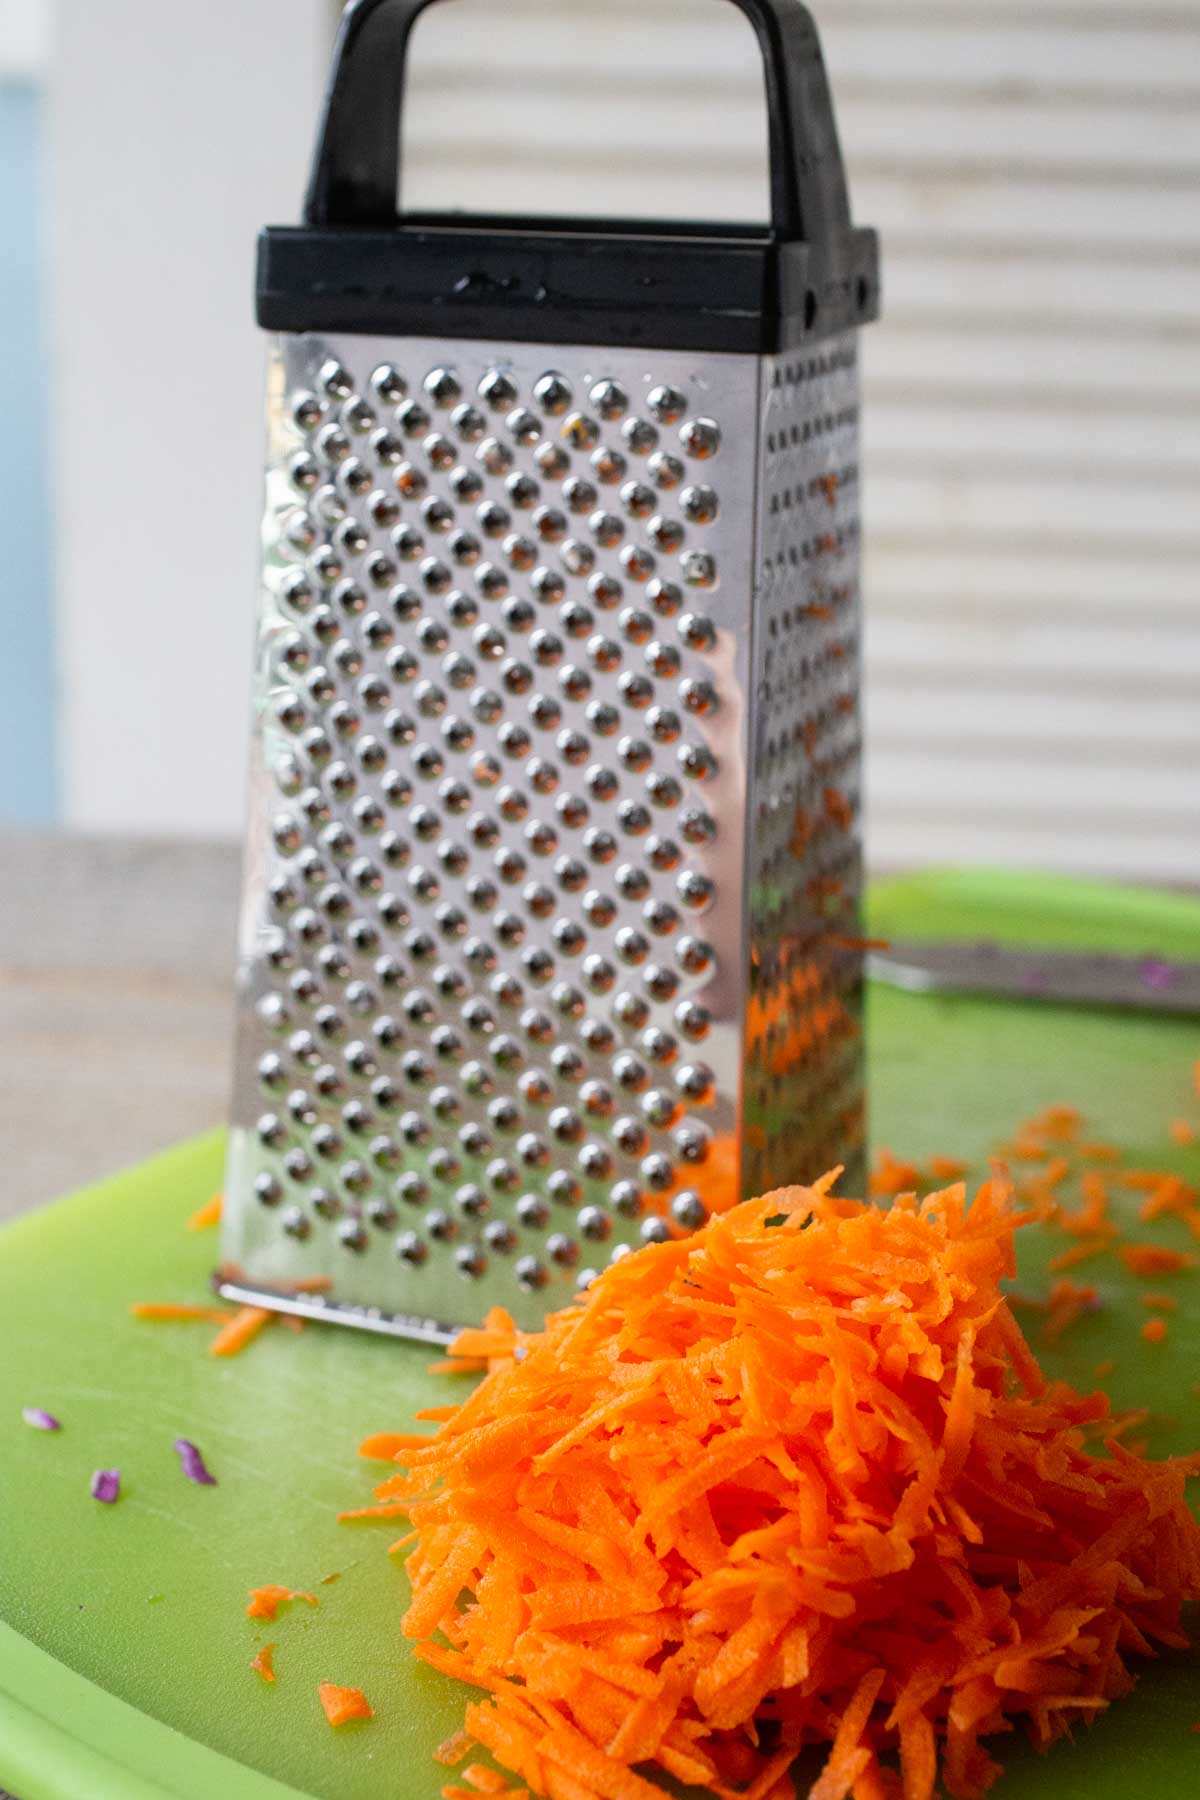 A box grater sits on a cutting board next to a pile of shredded carrots.